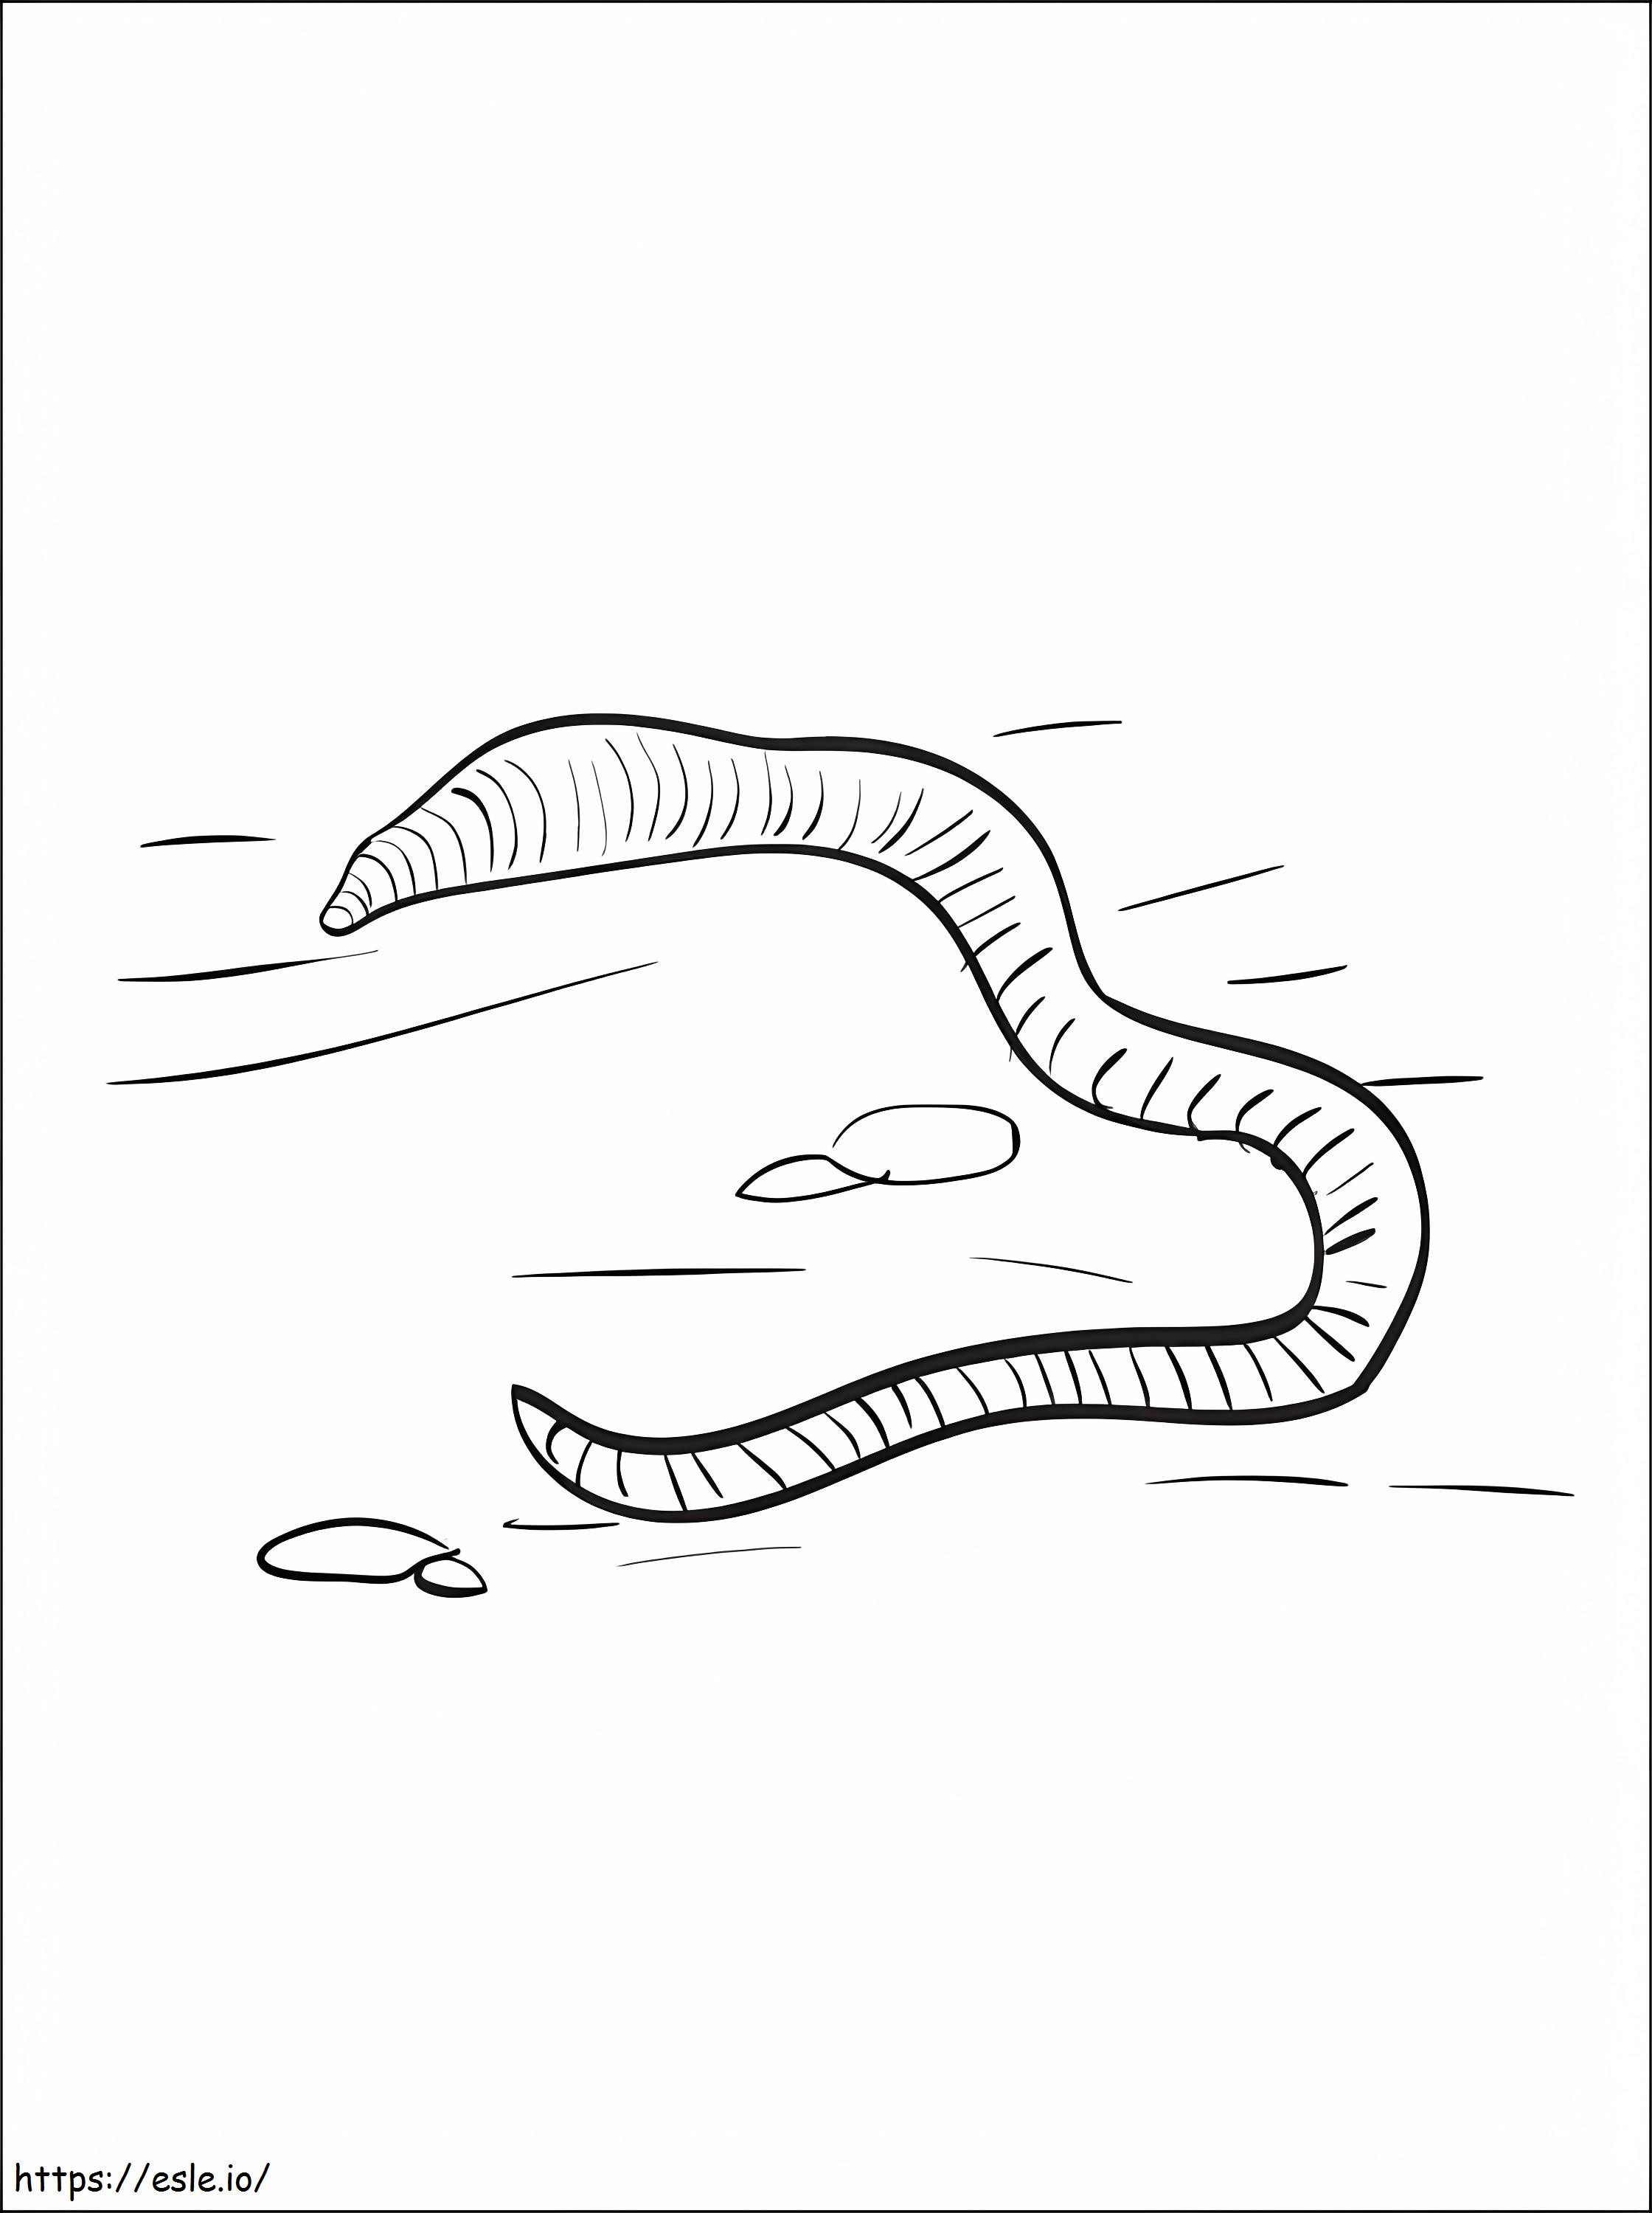 Earthworm 2 coloring page